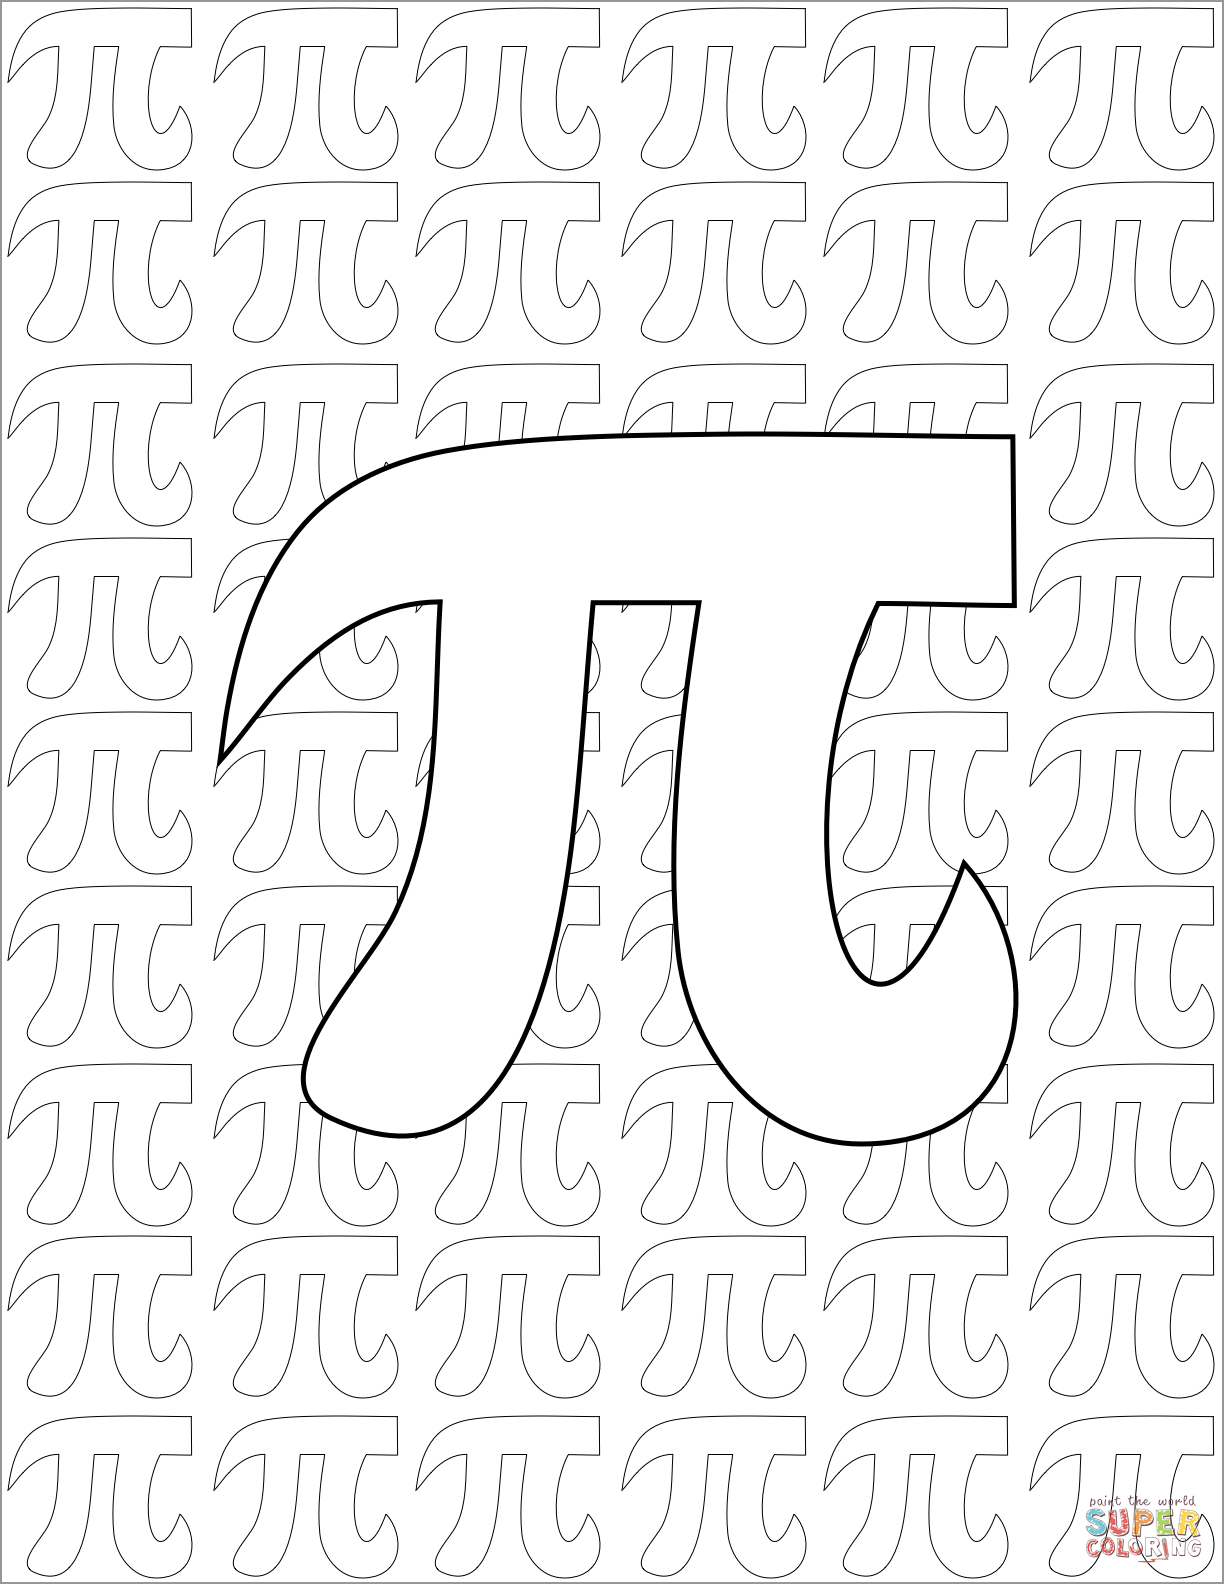 Pi day pattern coloring page free printable coloring pages